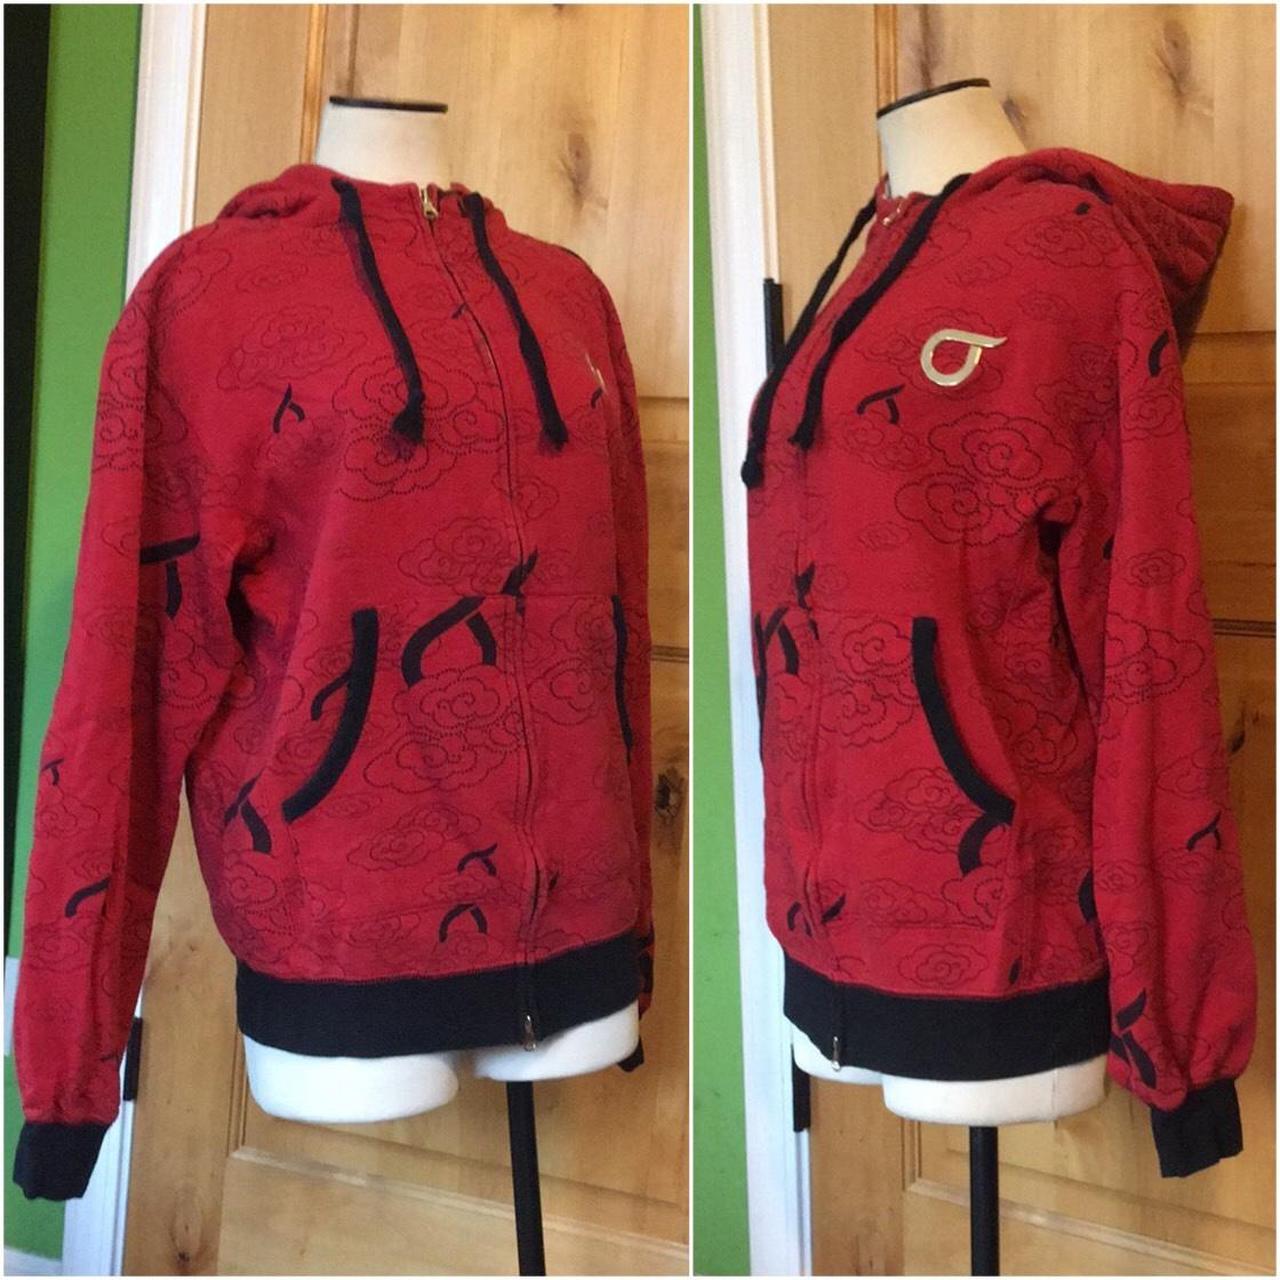 Hype Men's Red and Black Hoodie (2)